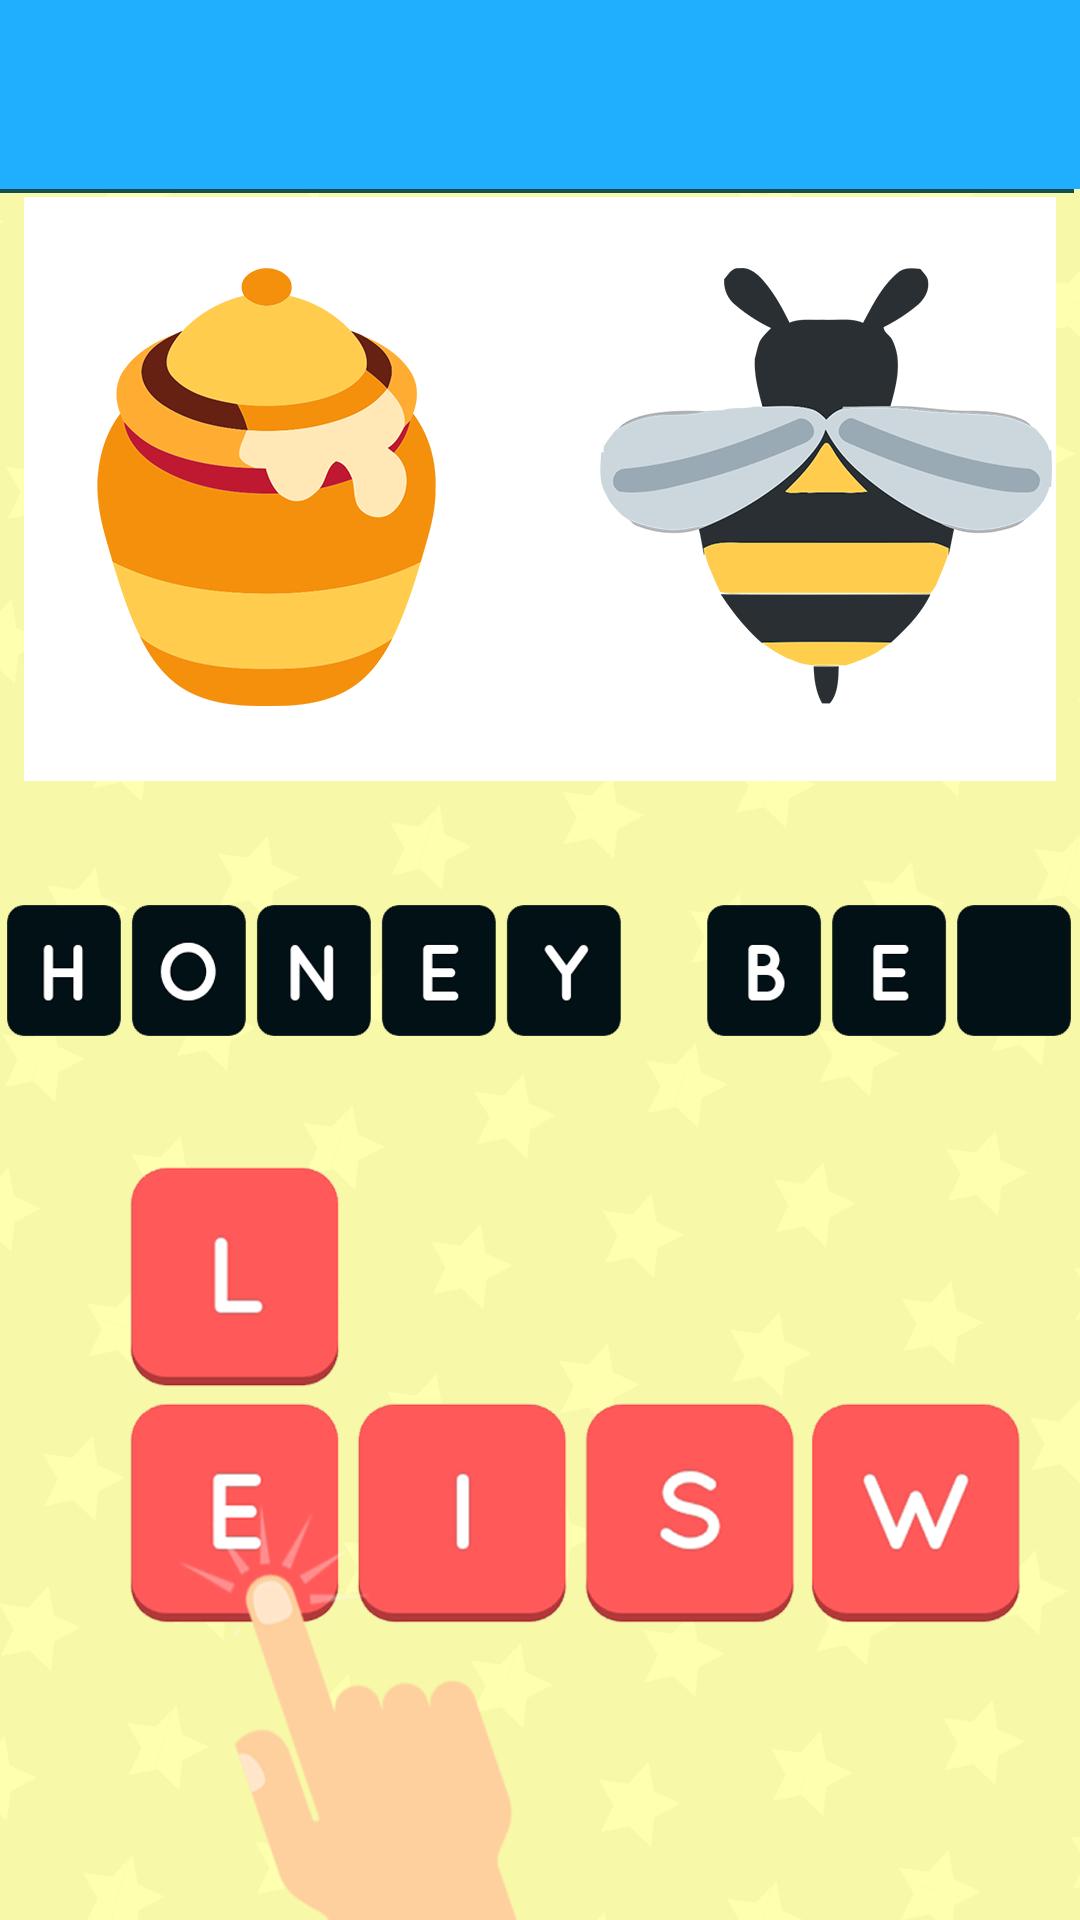 Emoji Quiz. Combine & Guess the Emoji! for Android - APK Download